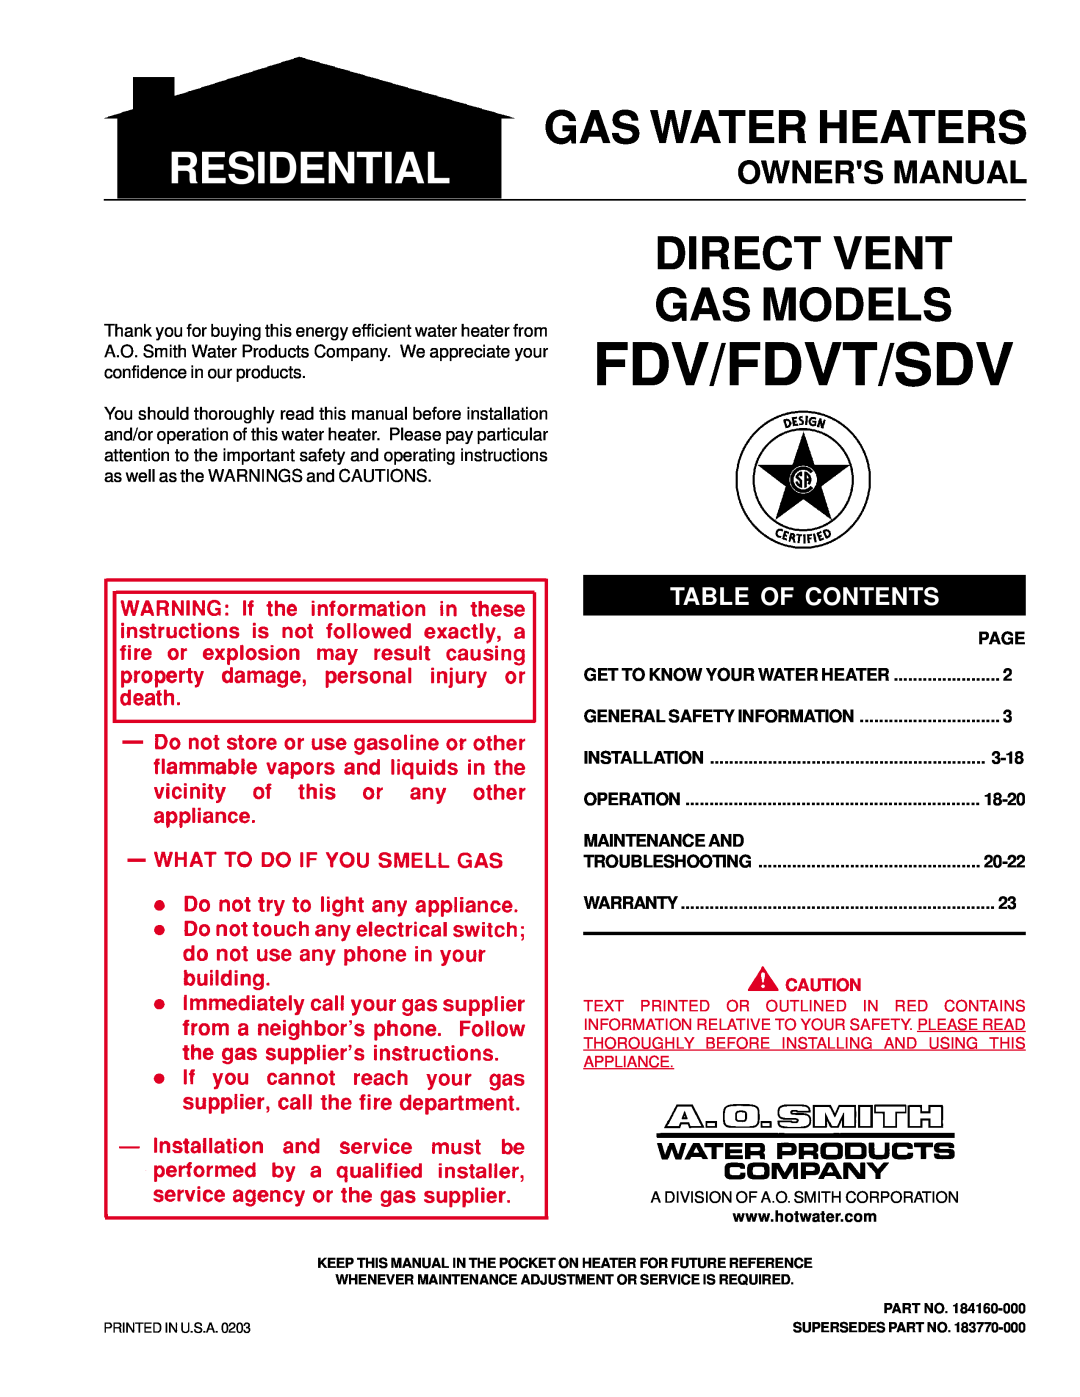 A.O. Smith FDVT owner manual Owners Manual, Page, 3-18, 18-20, Maintenance And, 20-22, Fdv/Fdvt/Sdv, Gas Water Heaters 